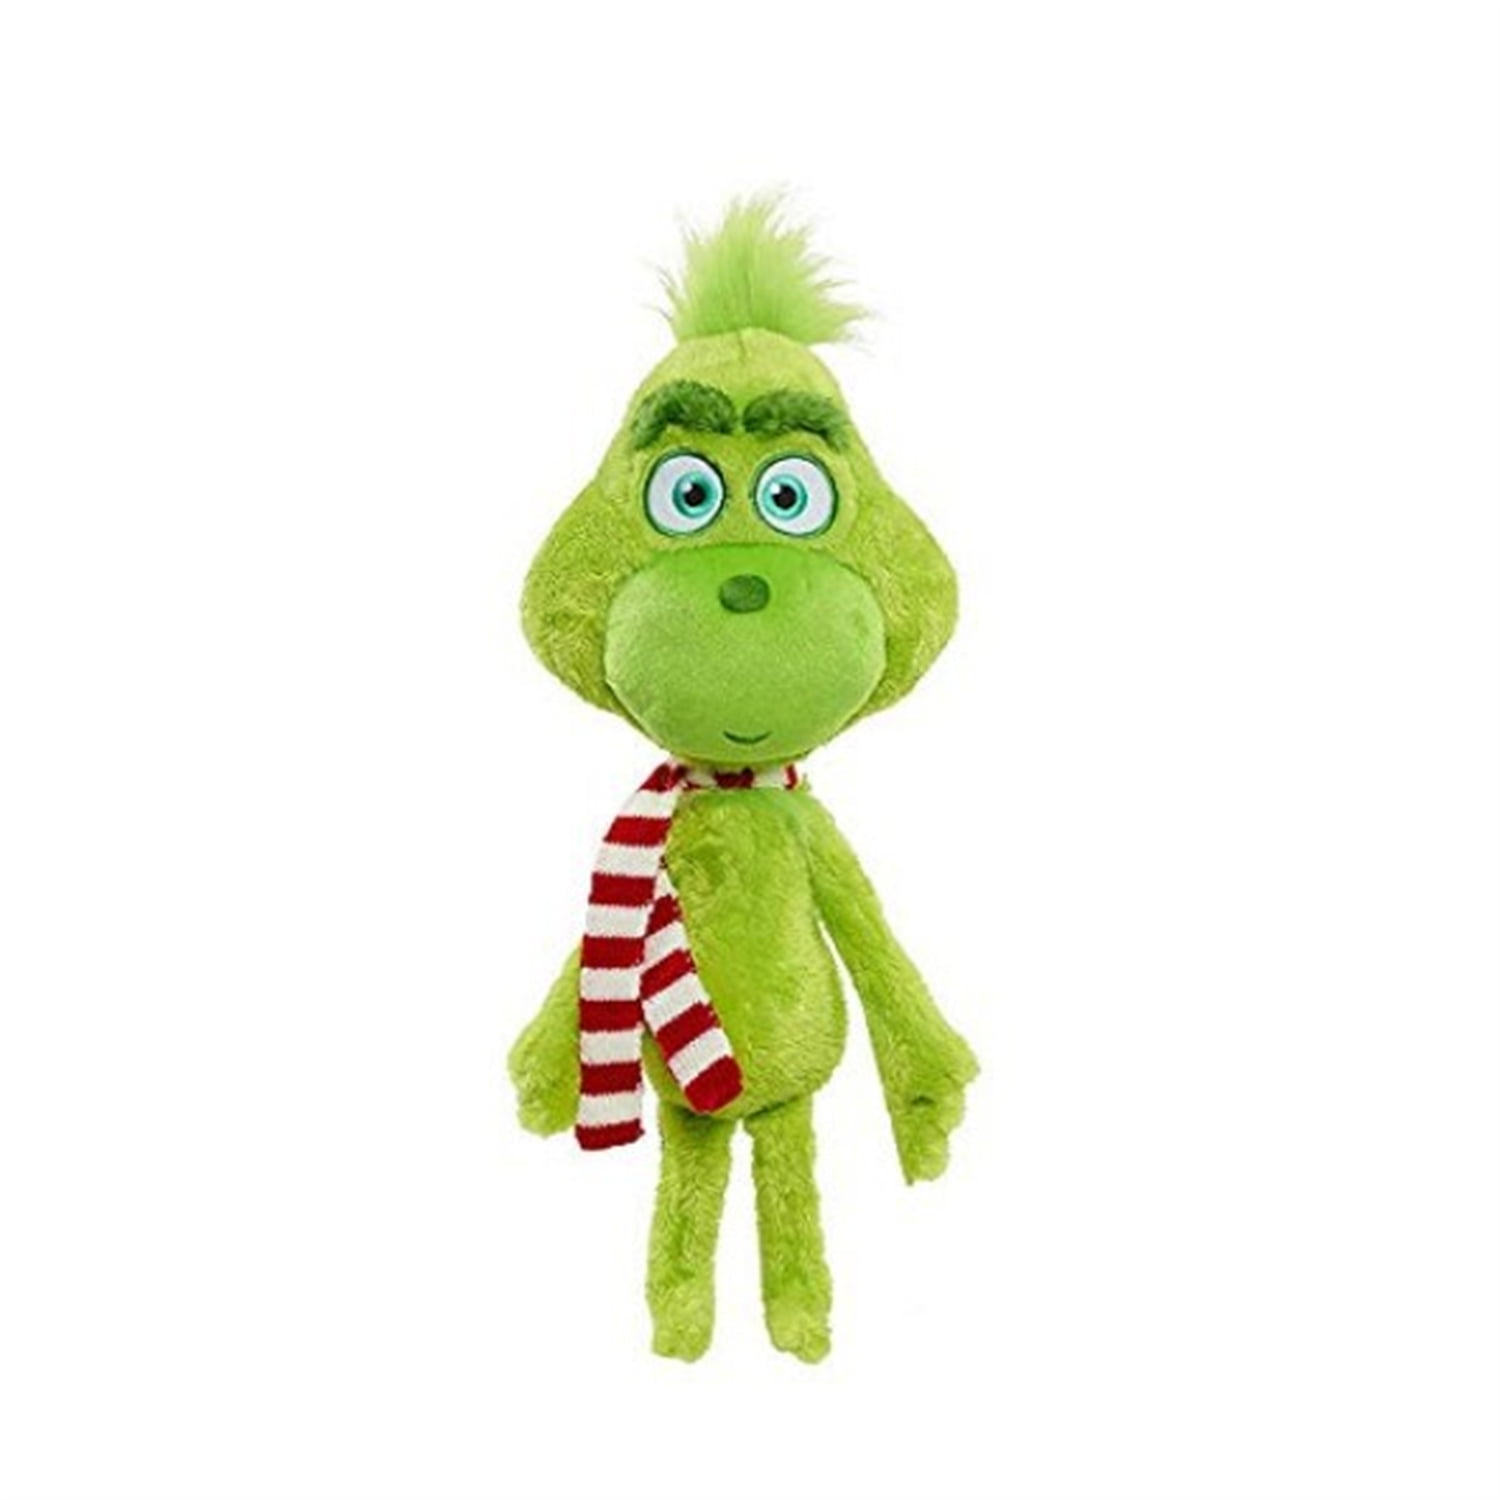  RELIGES Christmas Plush Toys, Green Monster Plush Toy, Suitable  for Christmas Decorations/Gifts, Stuffed Animal Doll for Boys and Girls  (B-Green Plush 7.8inch) : Toys & Games